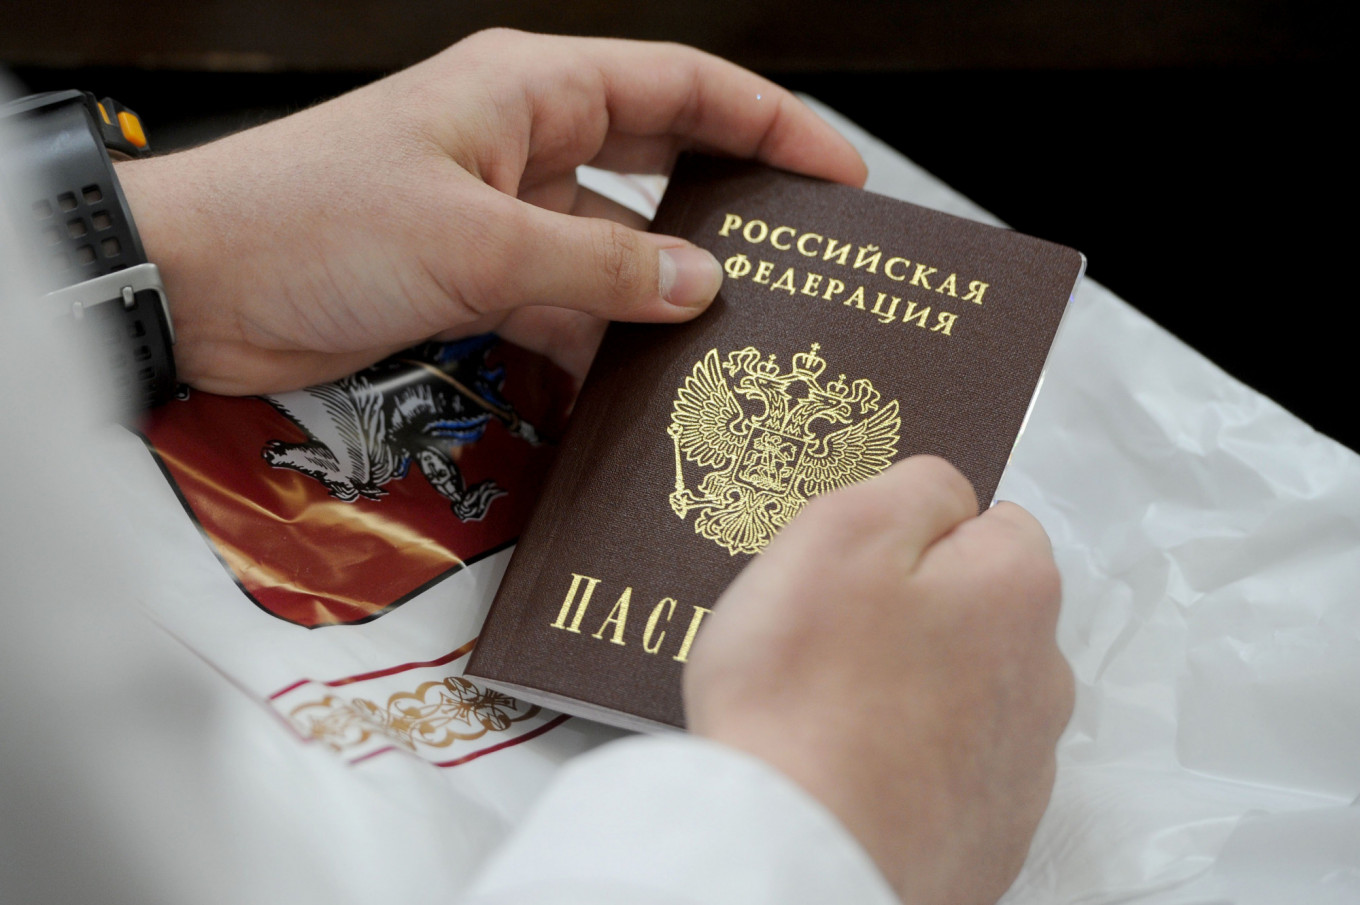 Putin Says Russia May Offer Fast-Tracked Passports to All Ukrainians